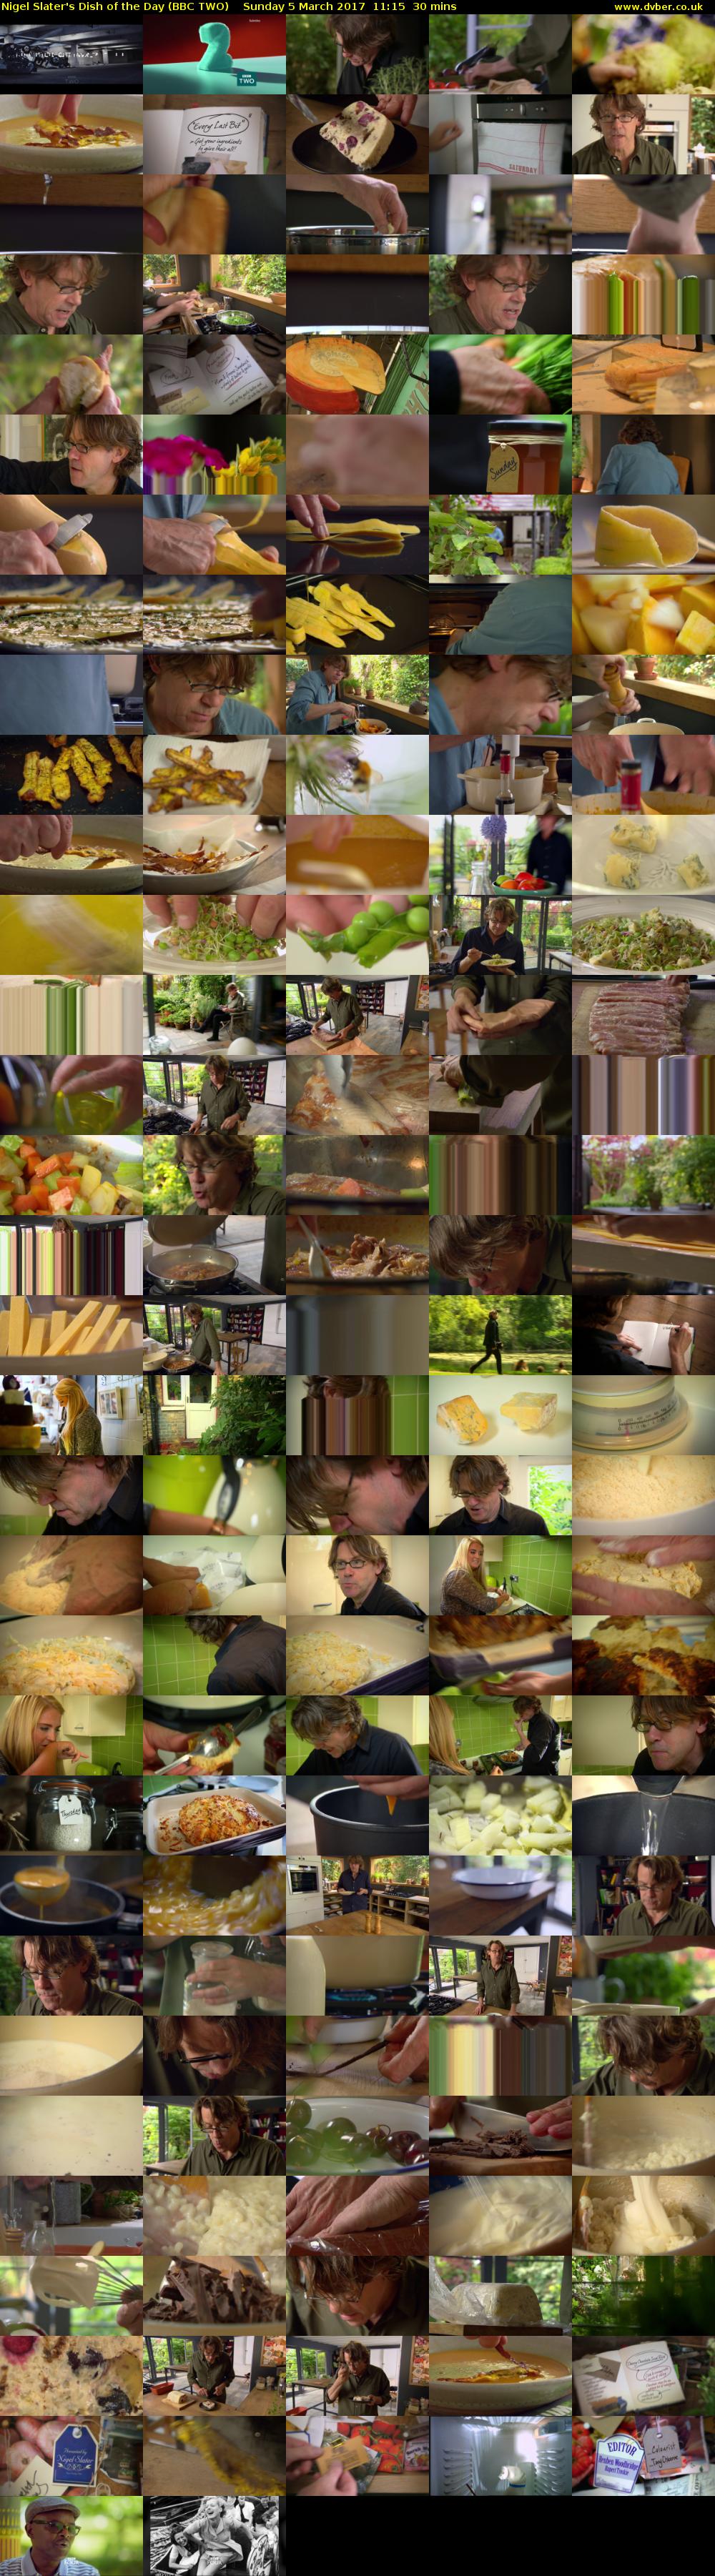 Nigel Slater's Dish of the Day (BBC TWO) Sunday 5 March 2017 11:15 - 11:45